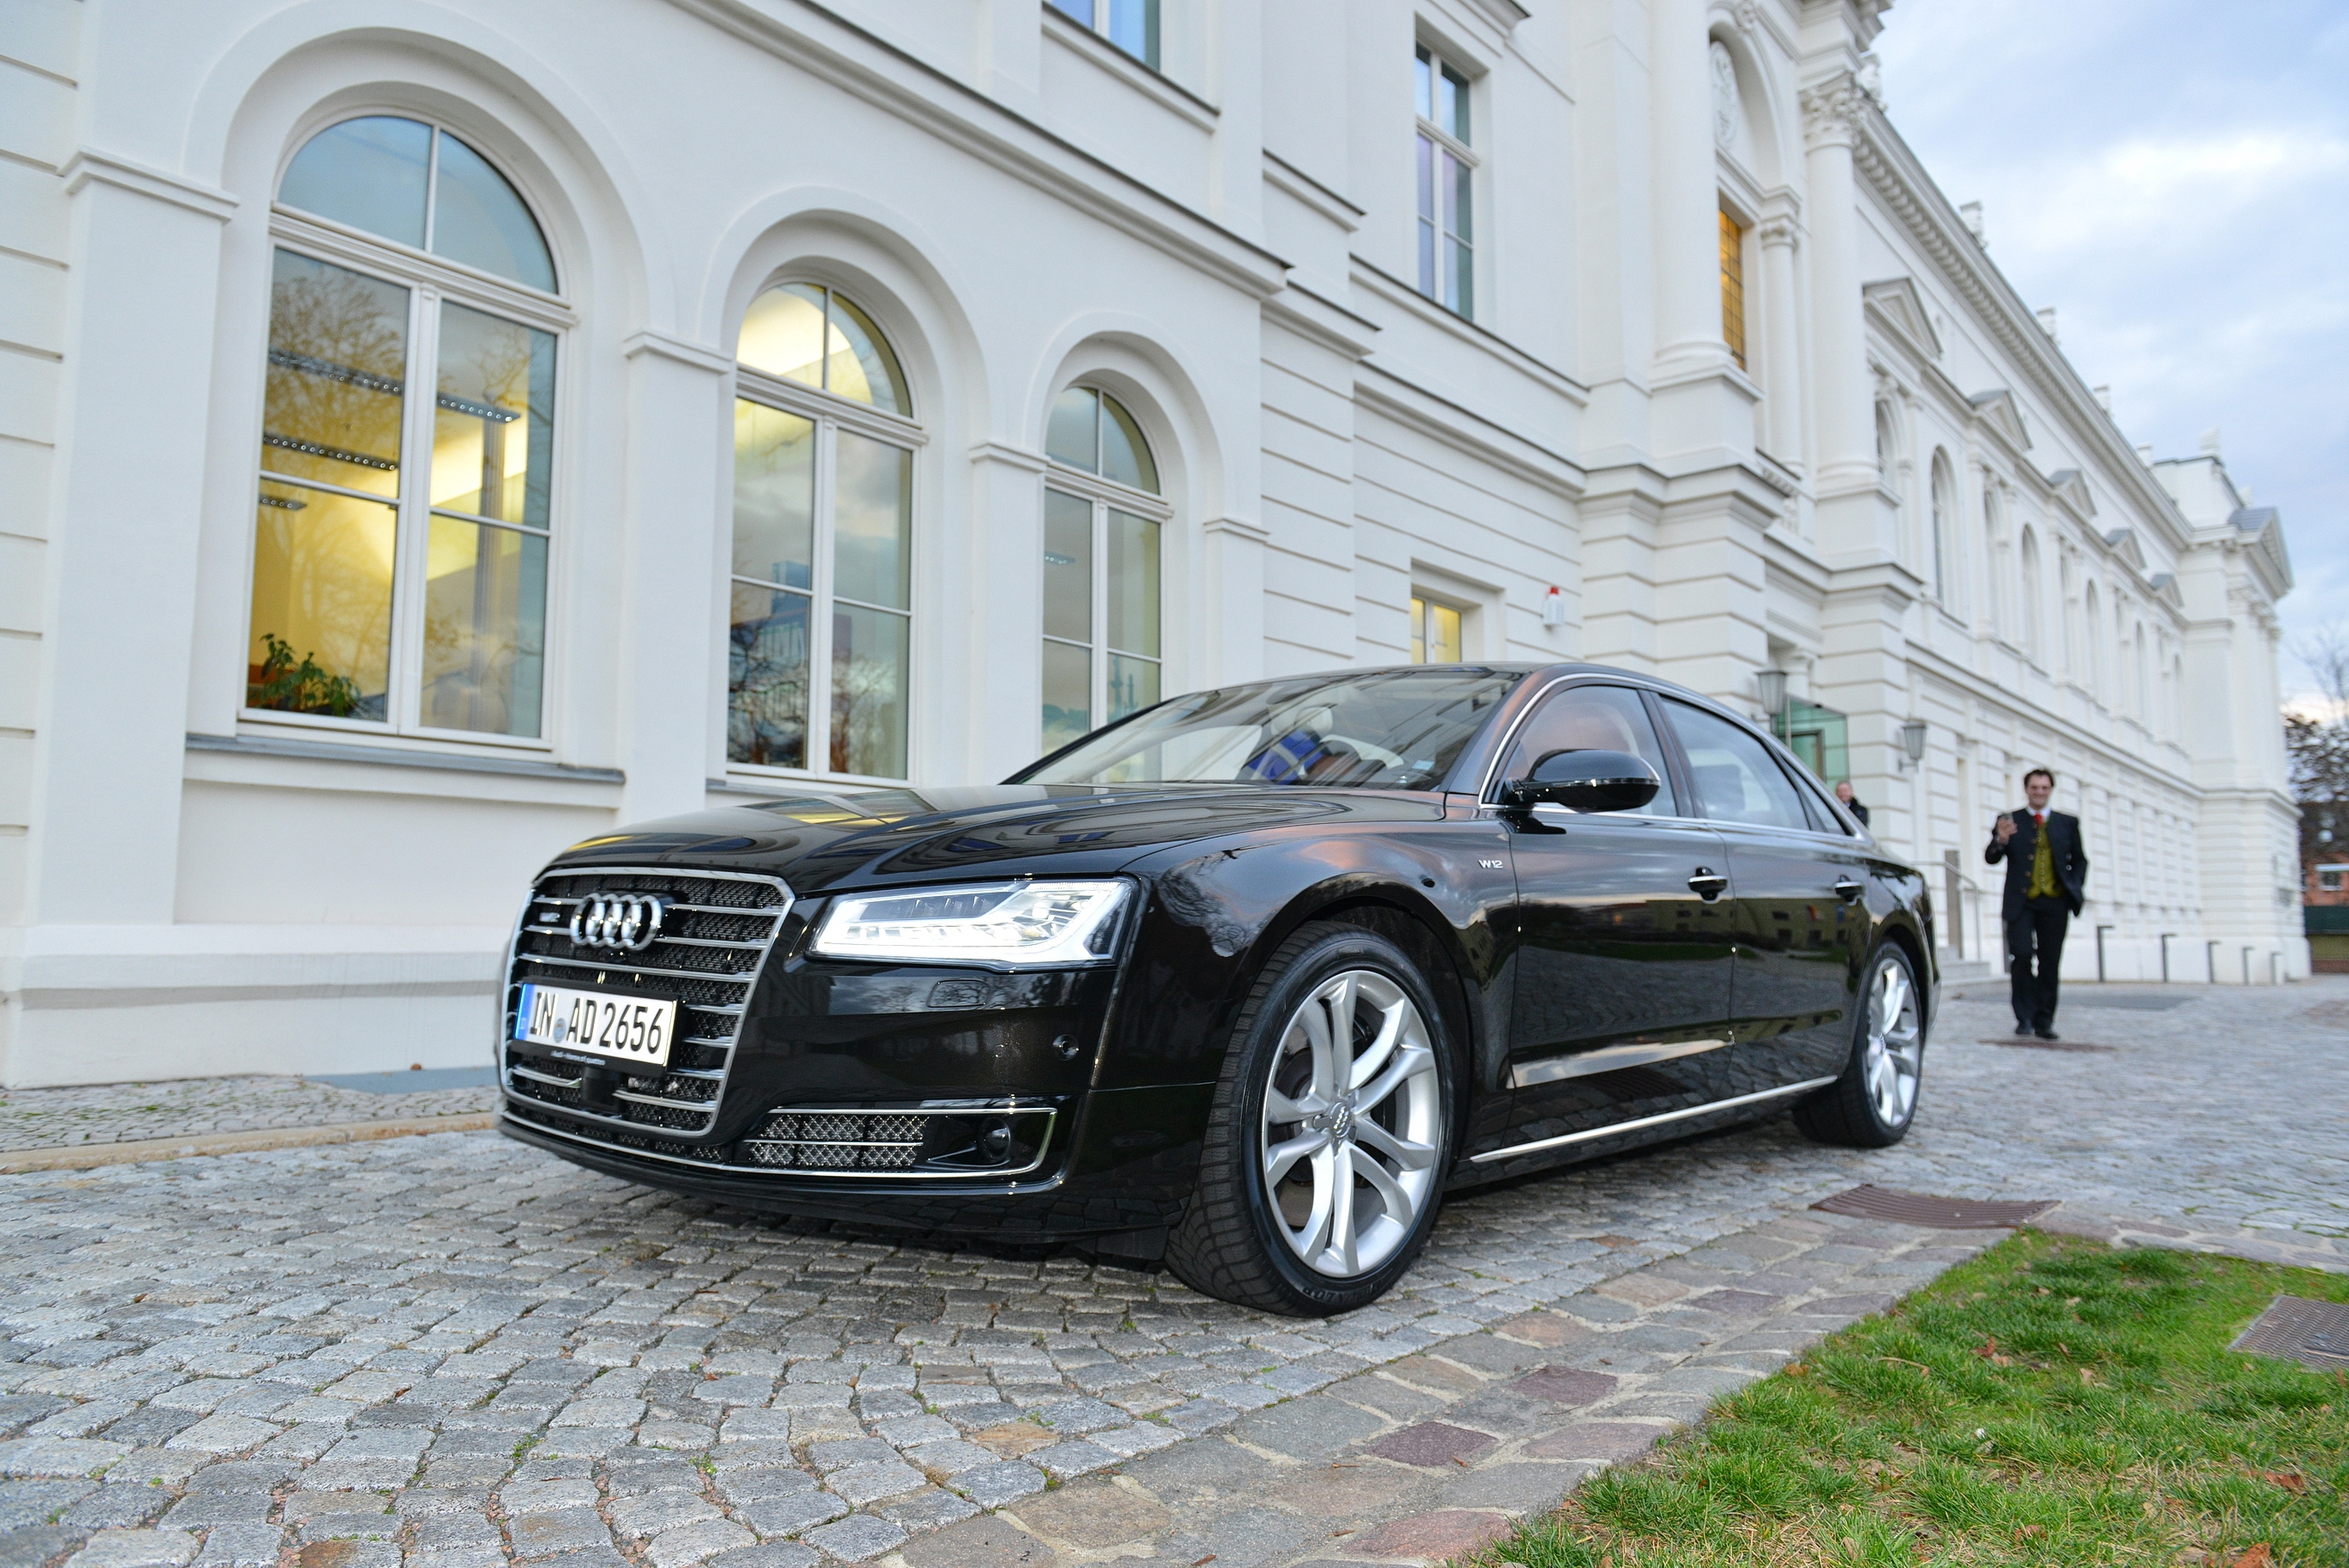 Reliability plays a particularly important role in autonomous driving, here a research vehicle of Audi.